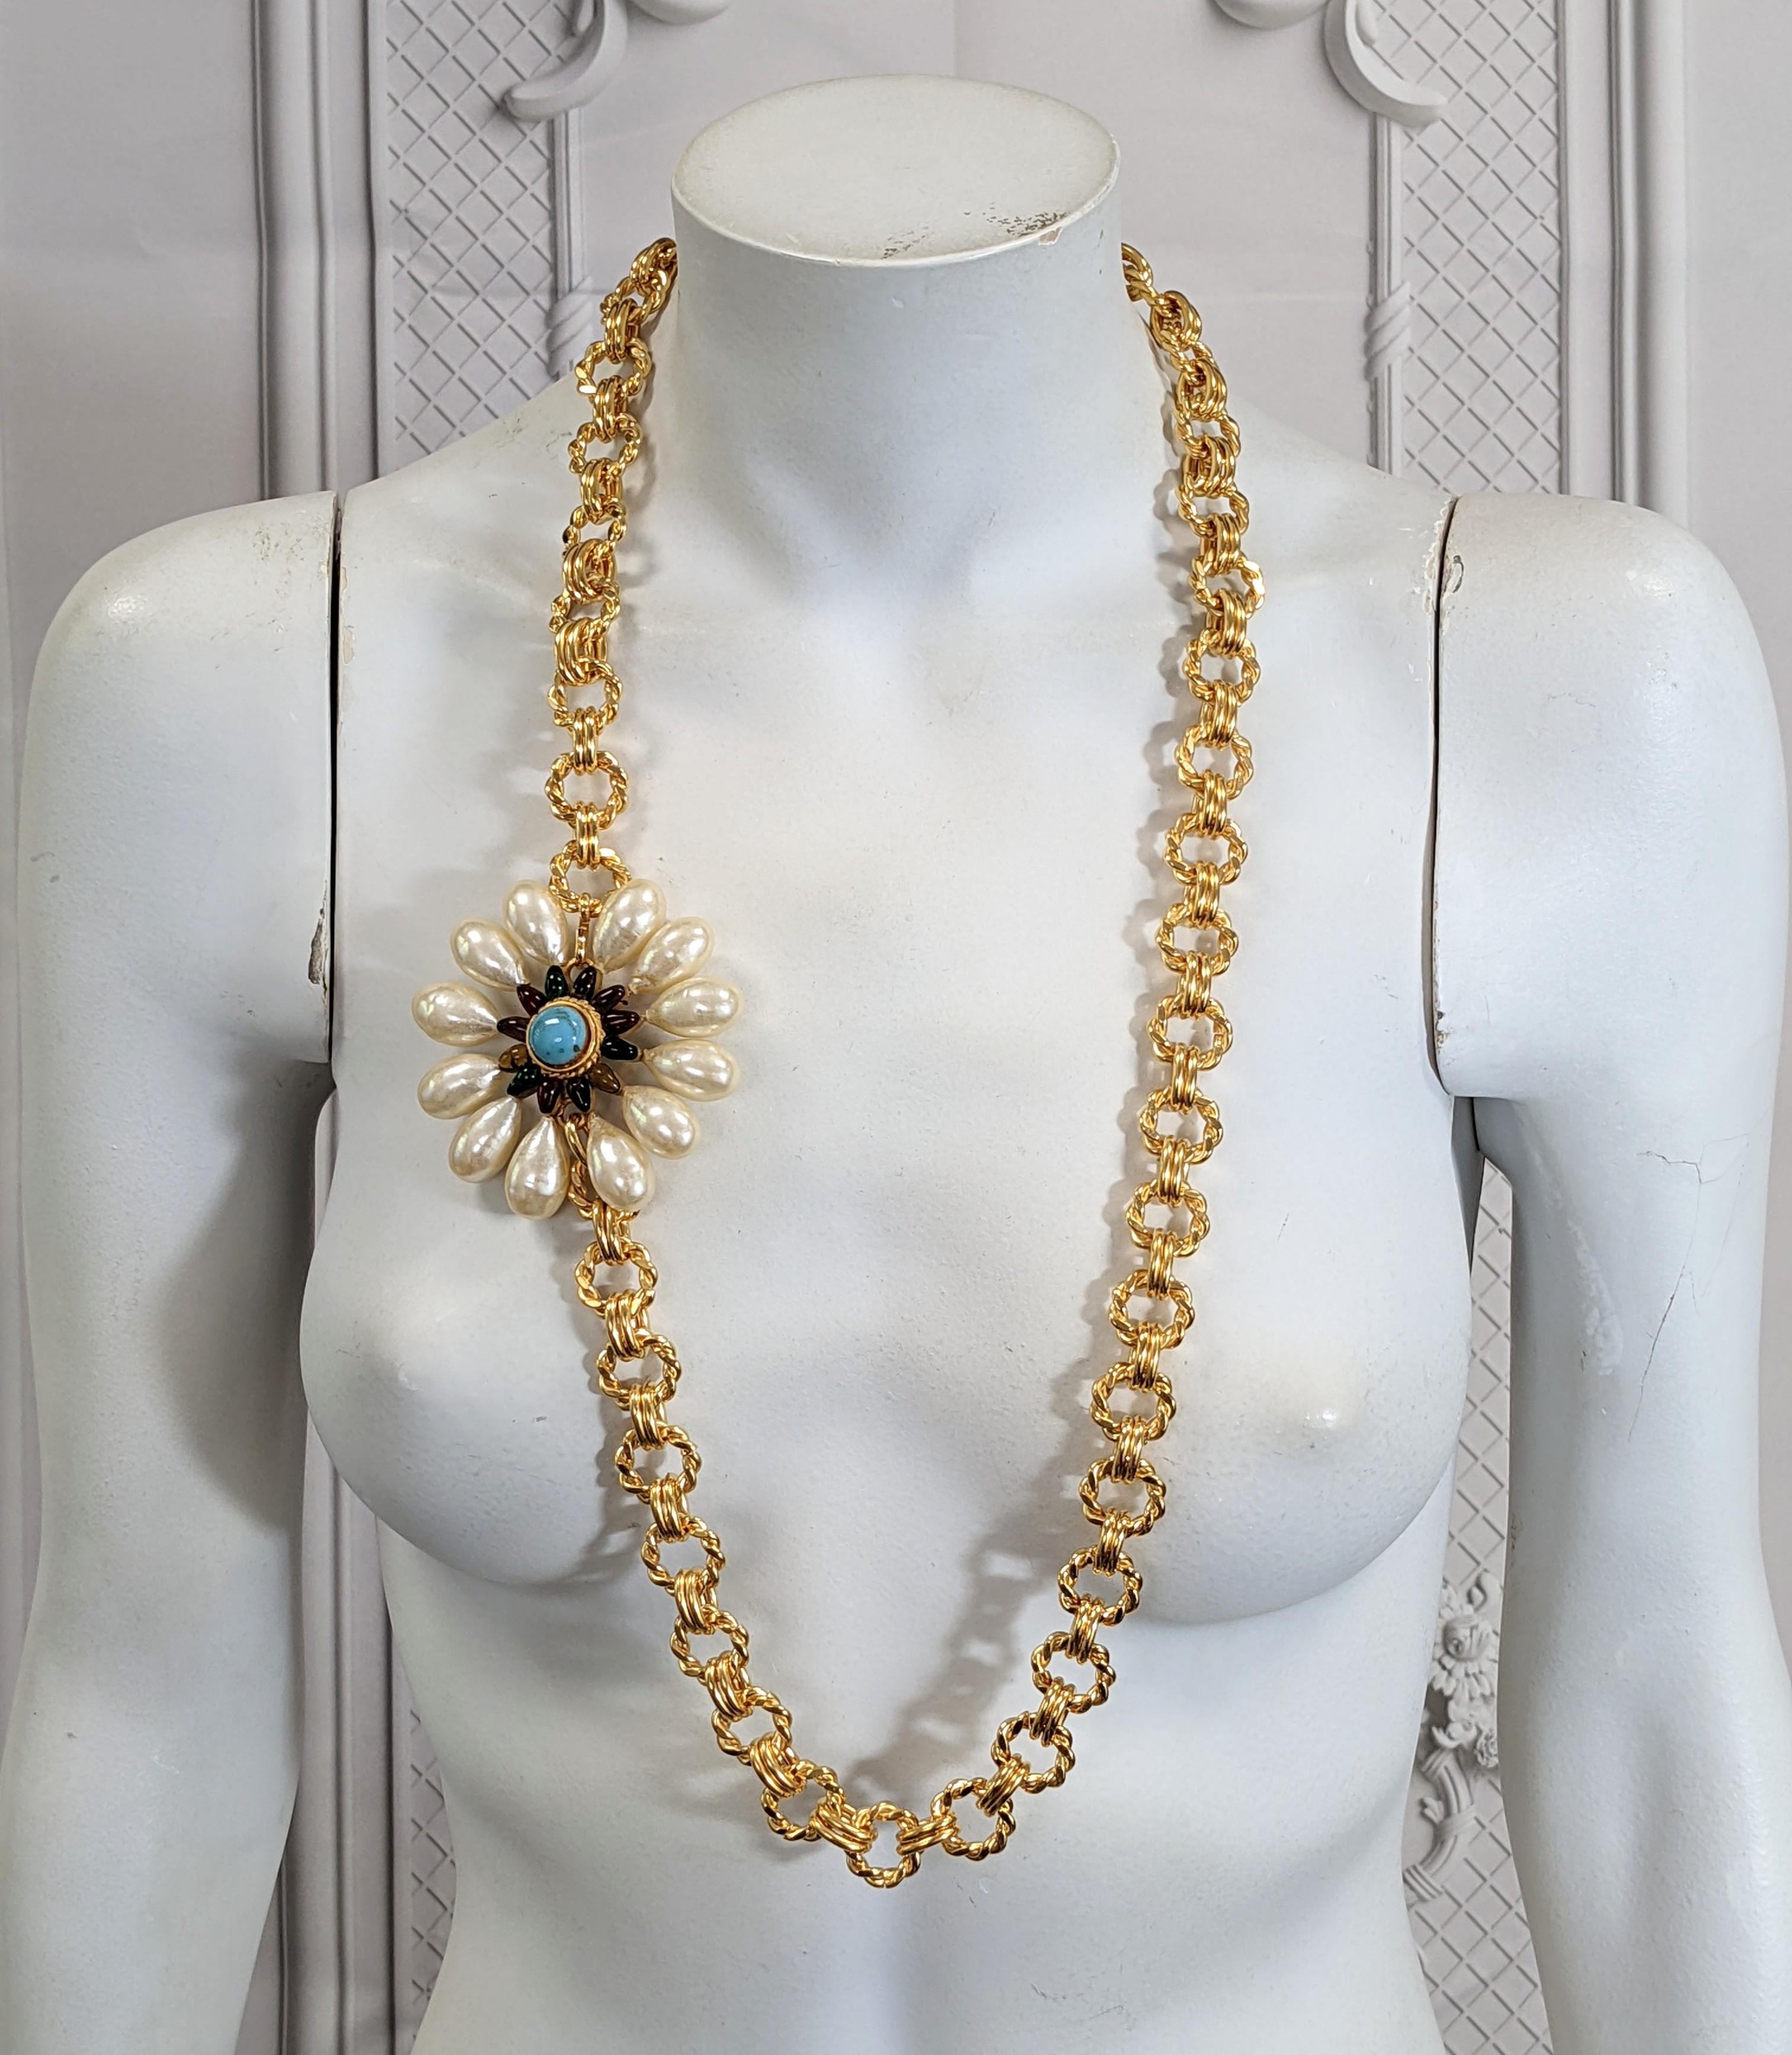 Maison Gripoix for Chanel Baroque Pearl Flowerhead Chain Necklace For Sale 4